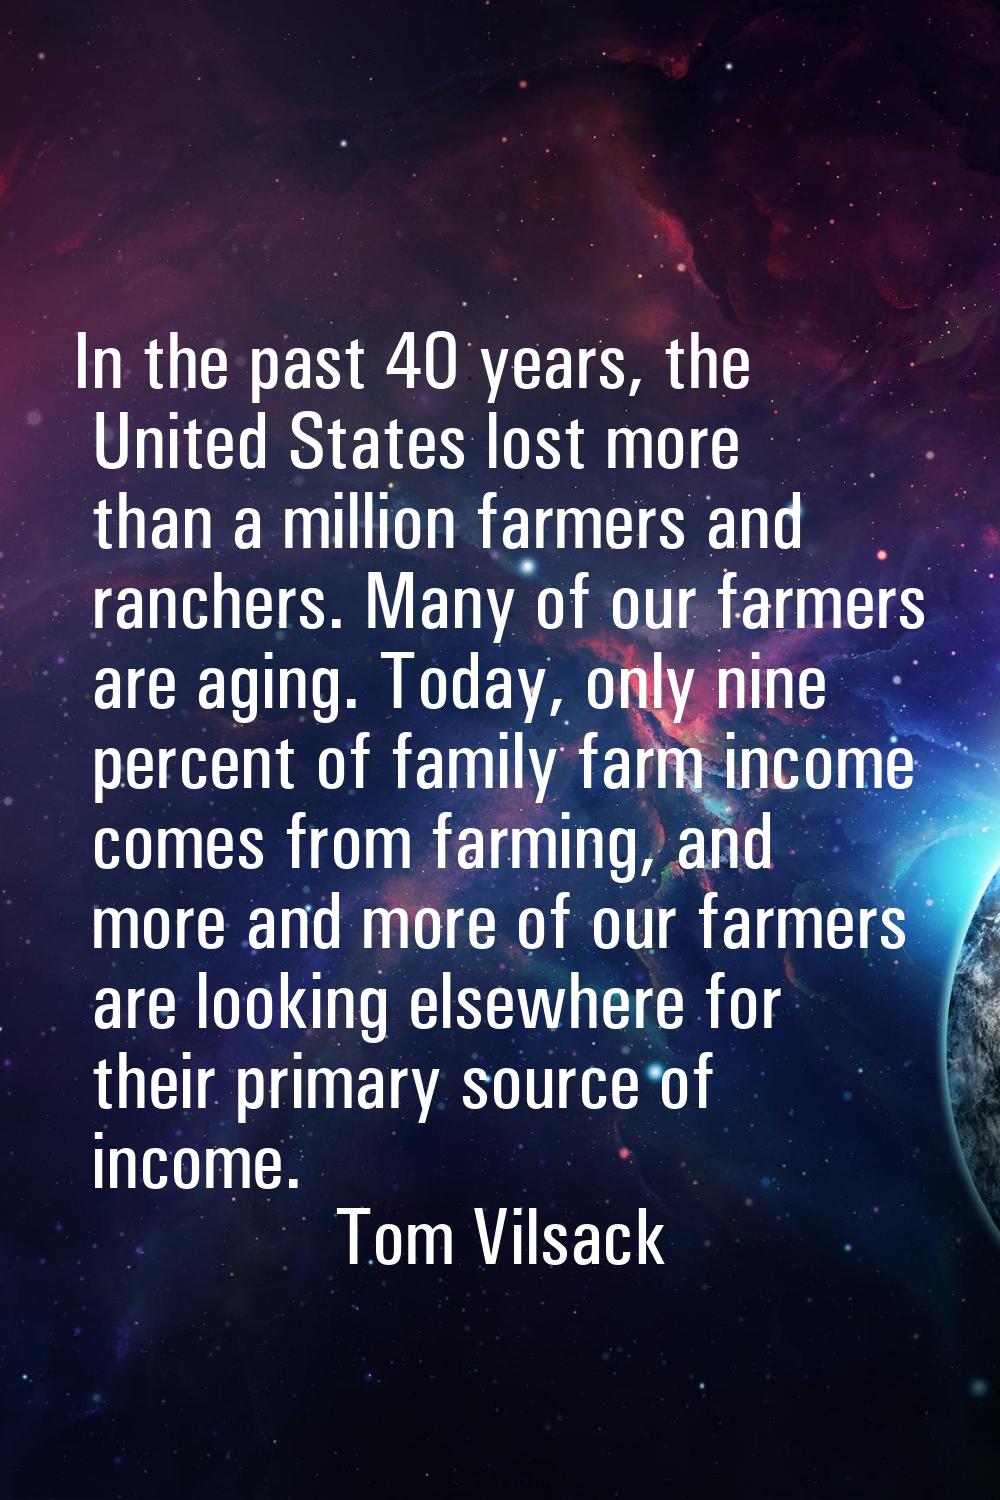 In the past 40 years, the United States lost more than a million farmers and ranchers. Many of our 